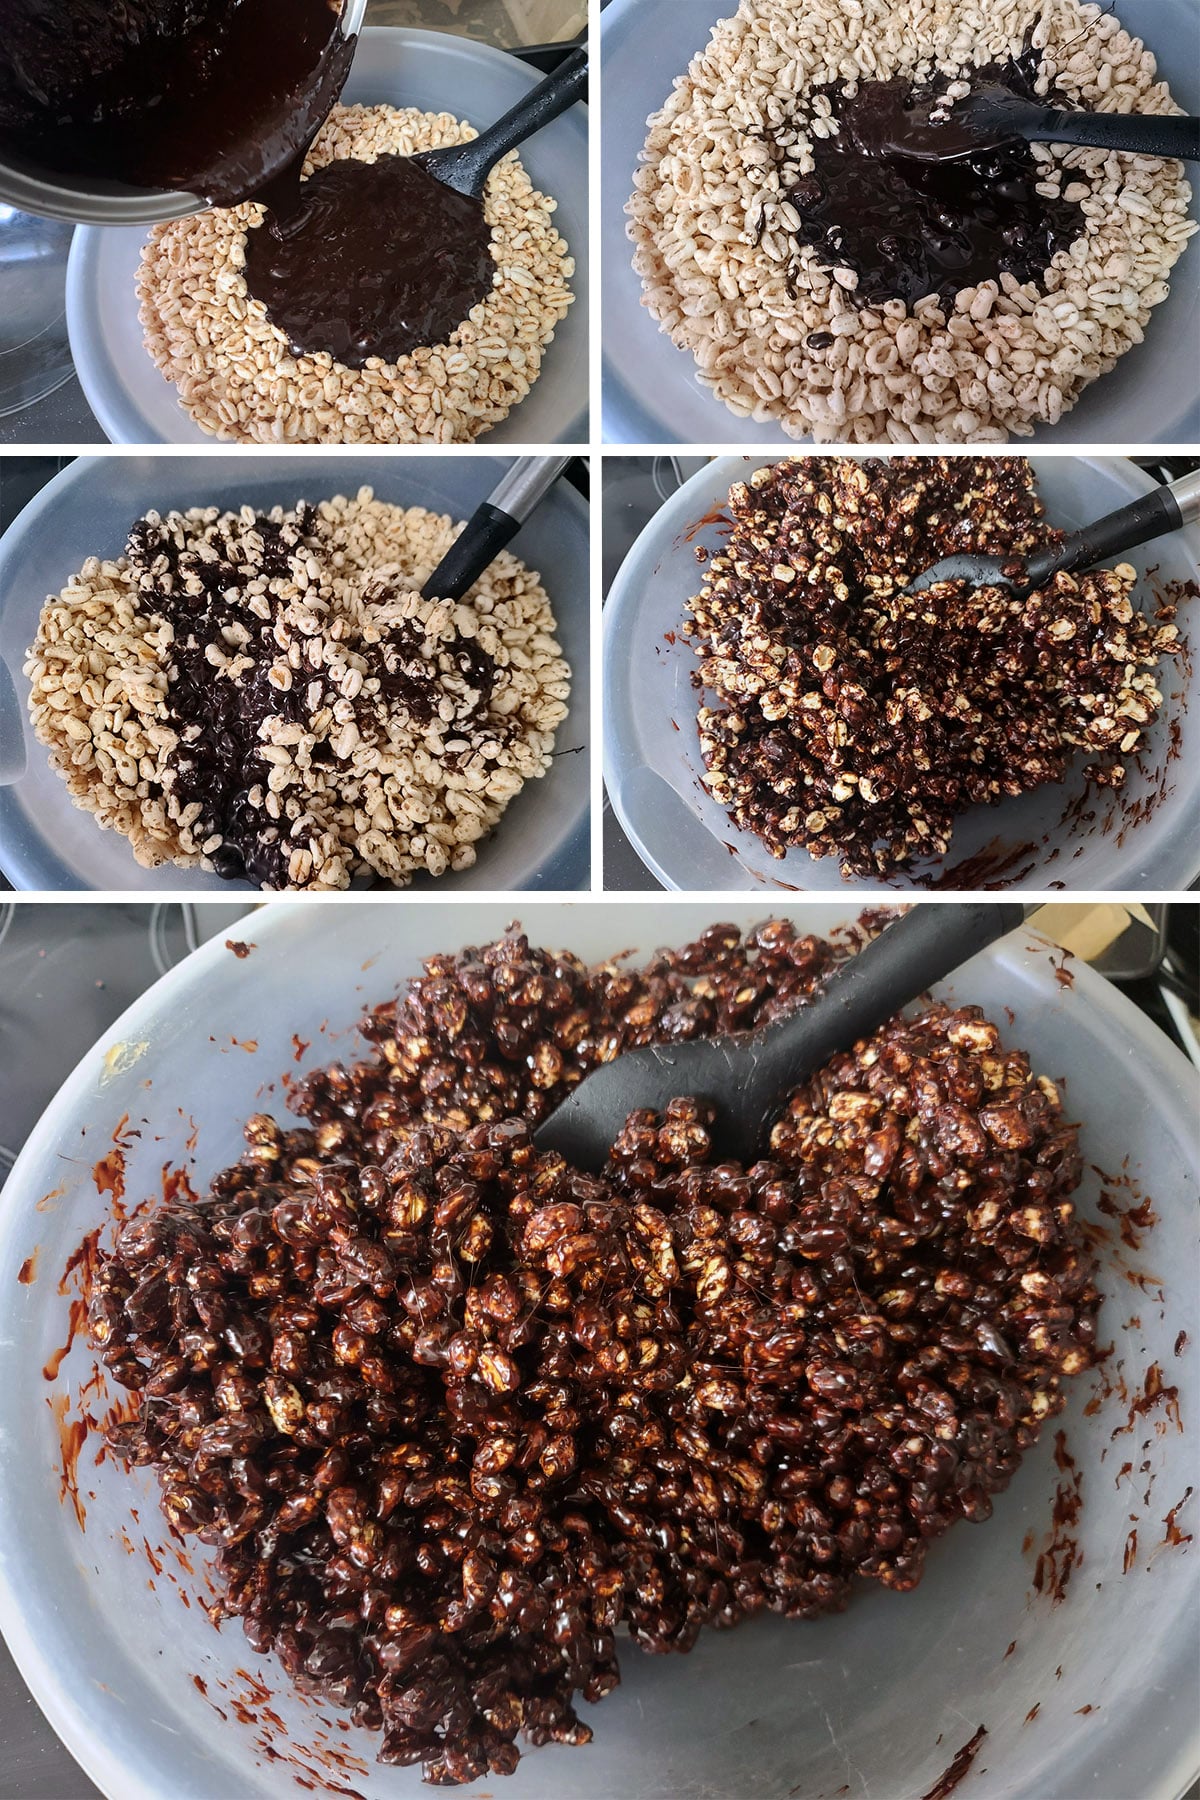 A 5 part image showing the chocolate sauce being poured over the puffed wheat and stirred until all of the cereal is fully coated.